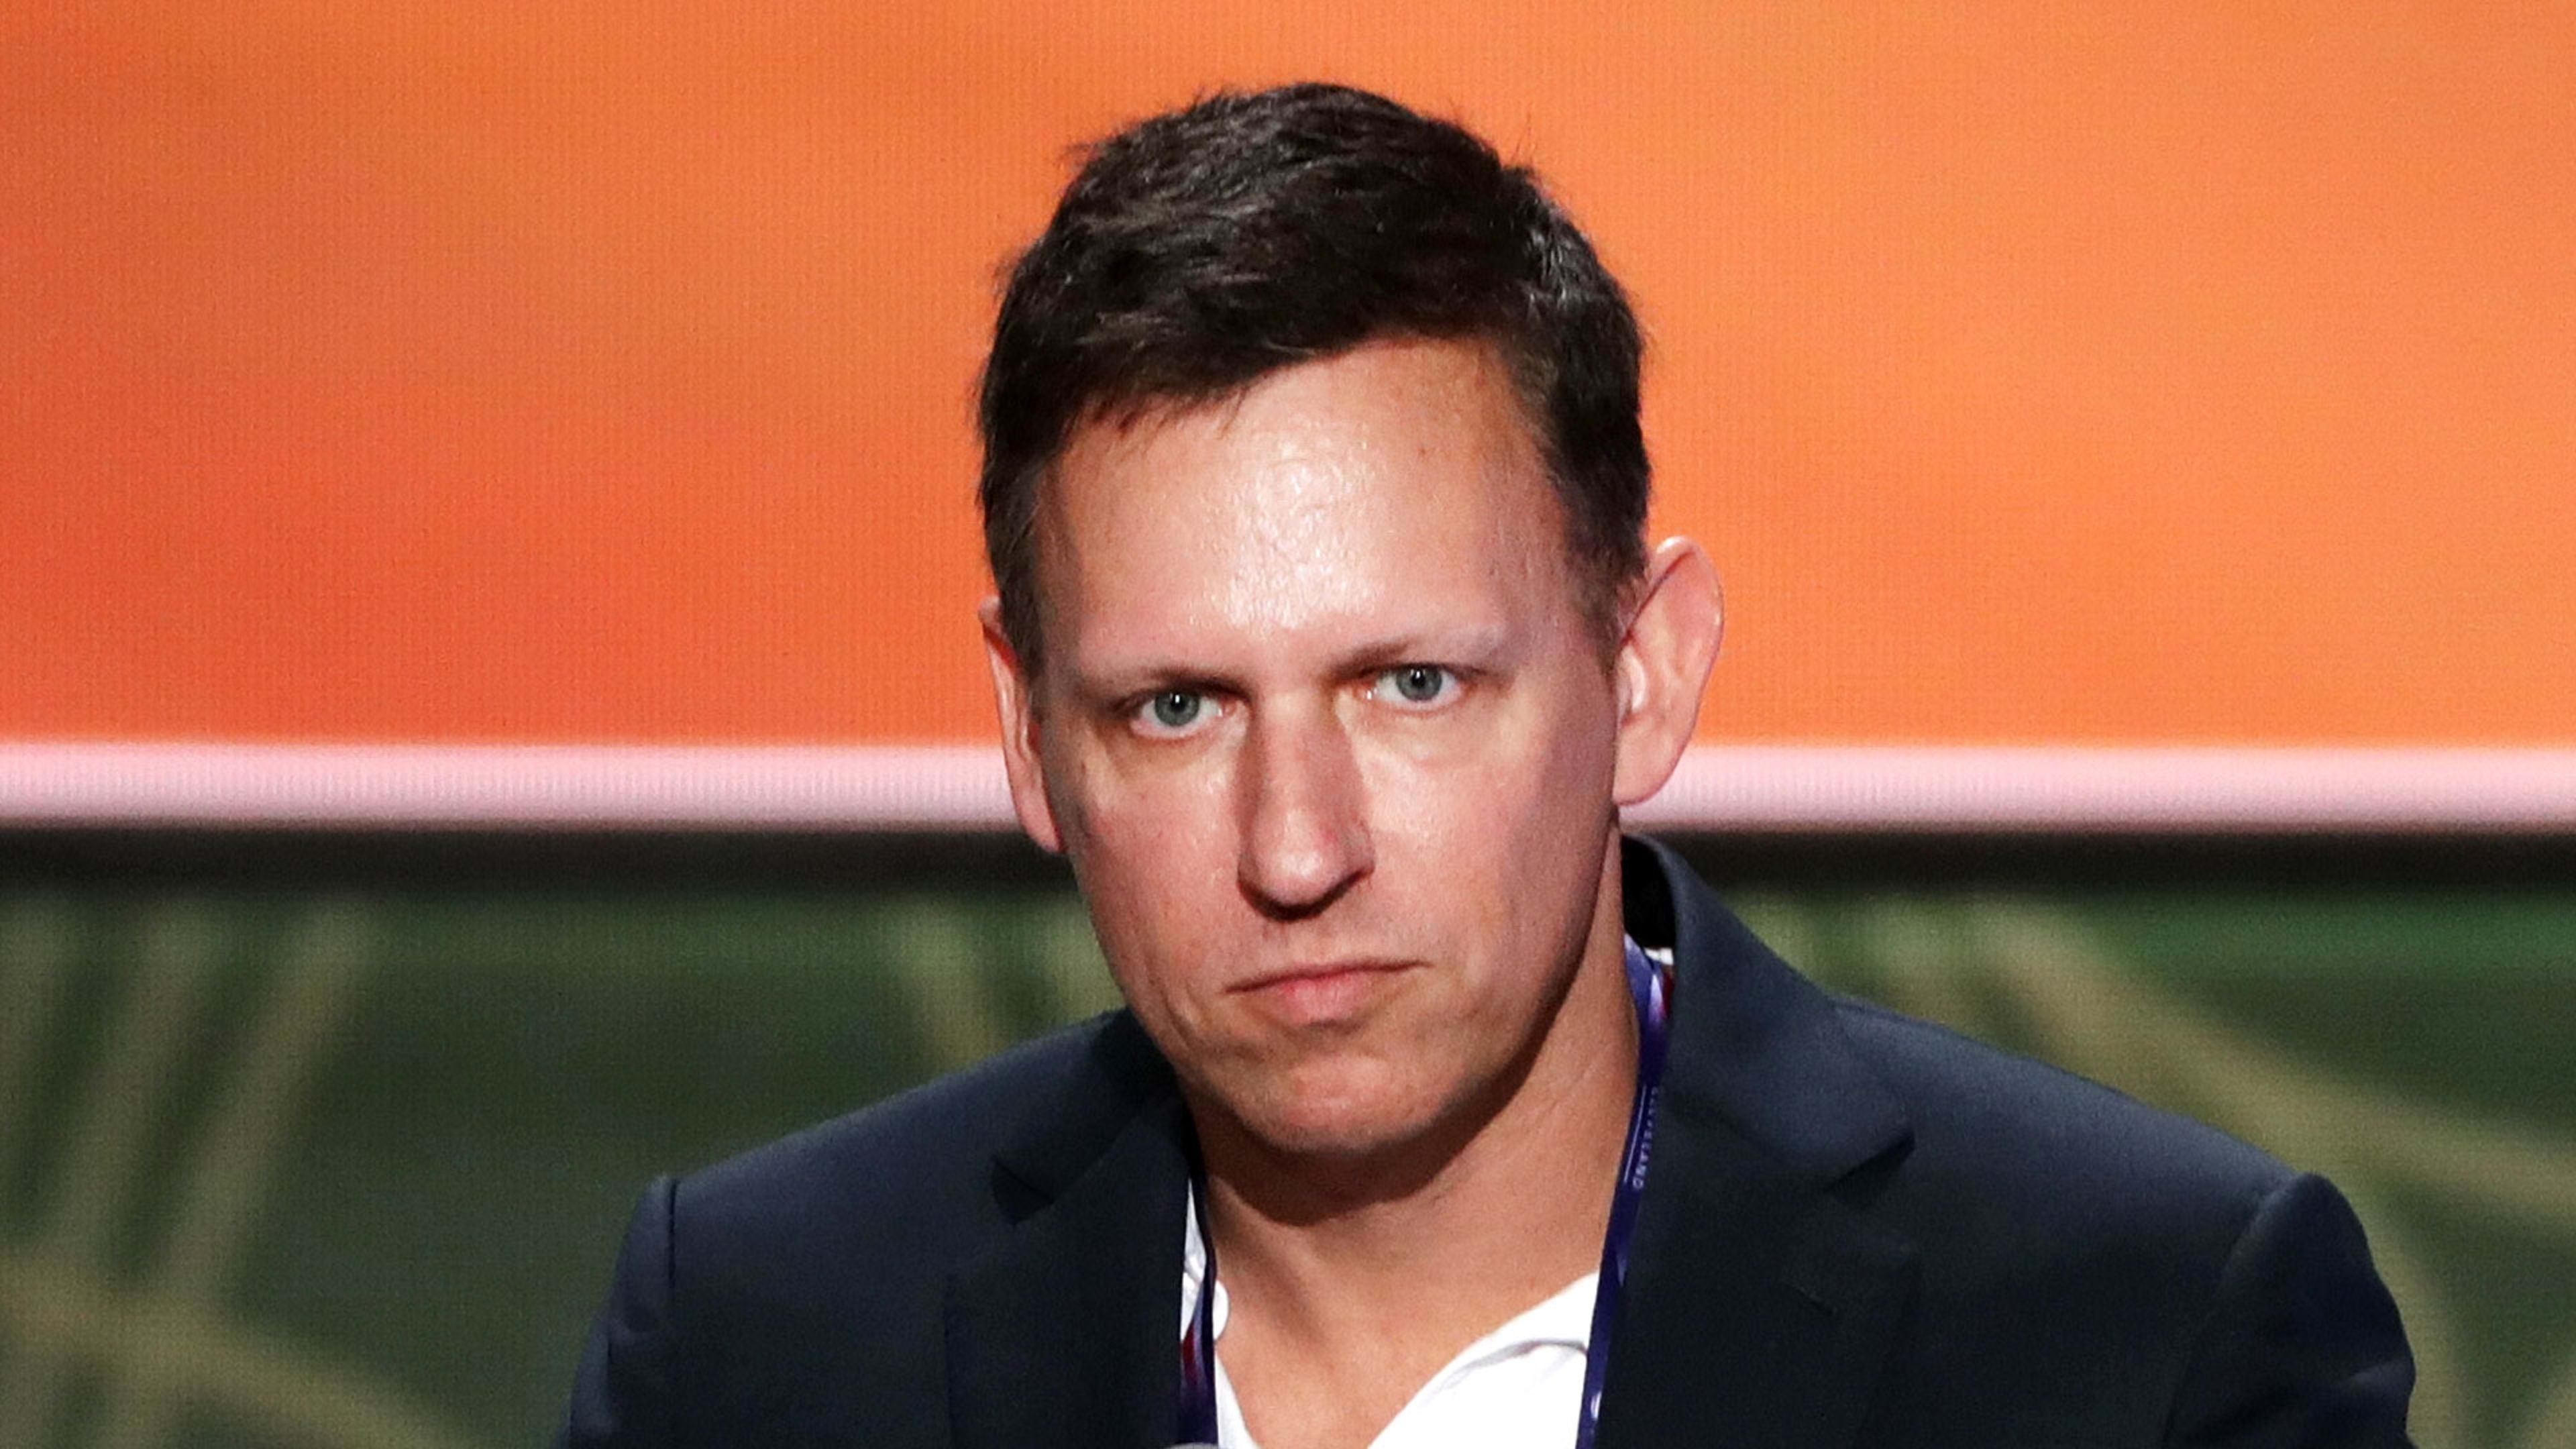 Peter Thiel is finally embracing gay stuff. Too bad it’s the gay Bodega